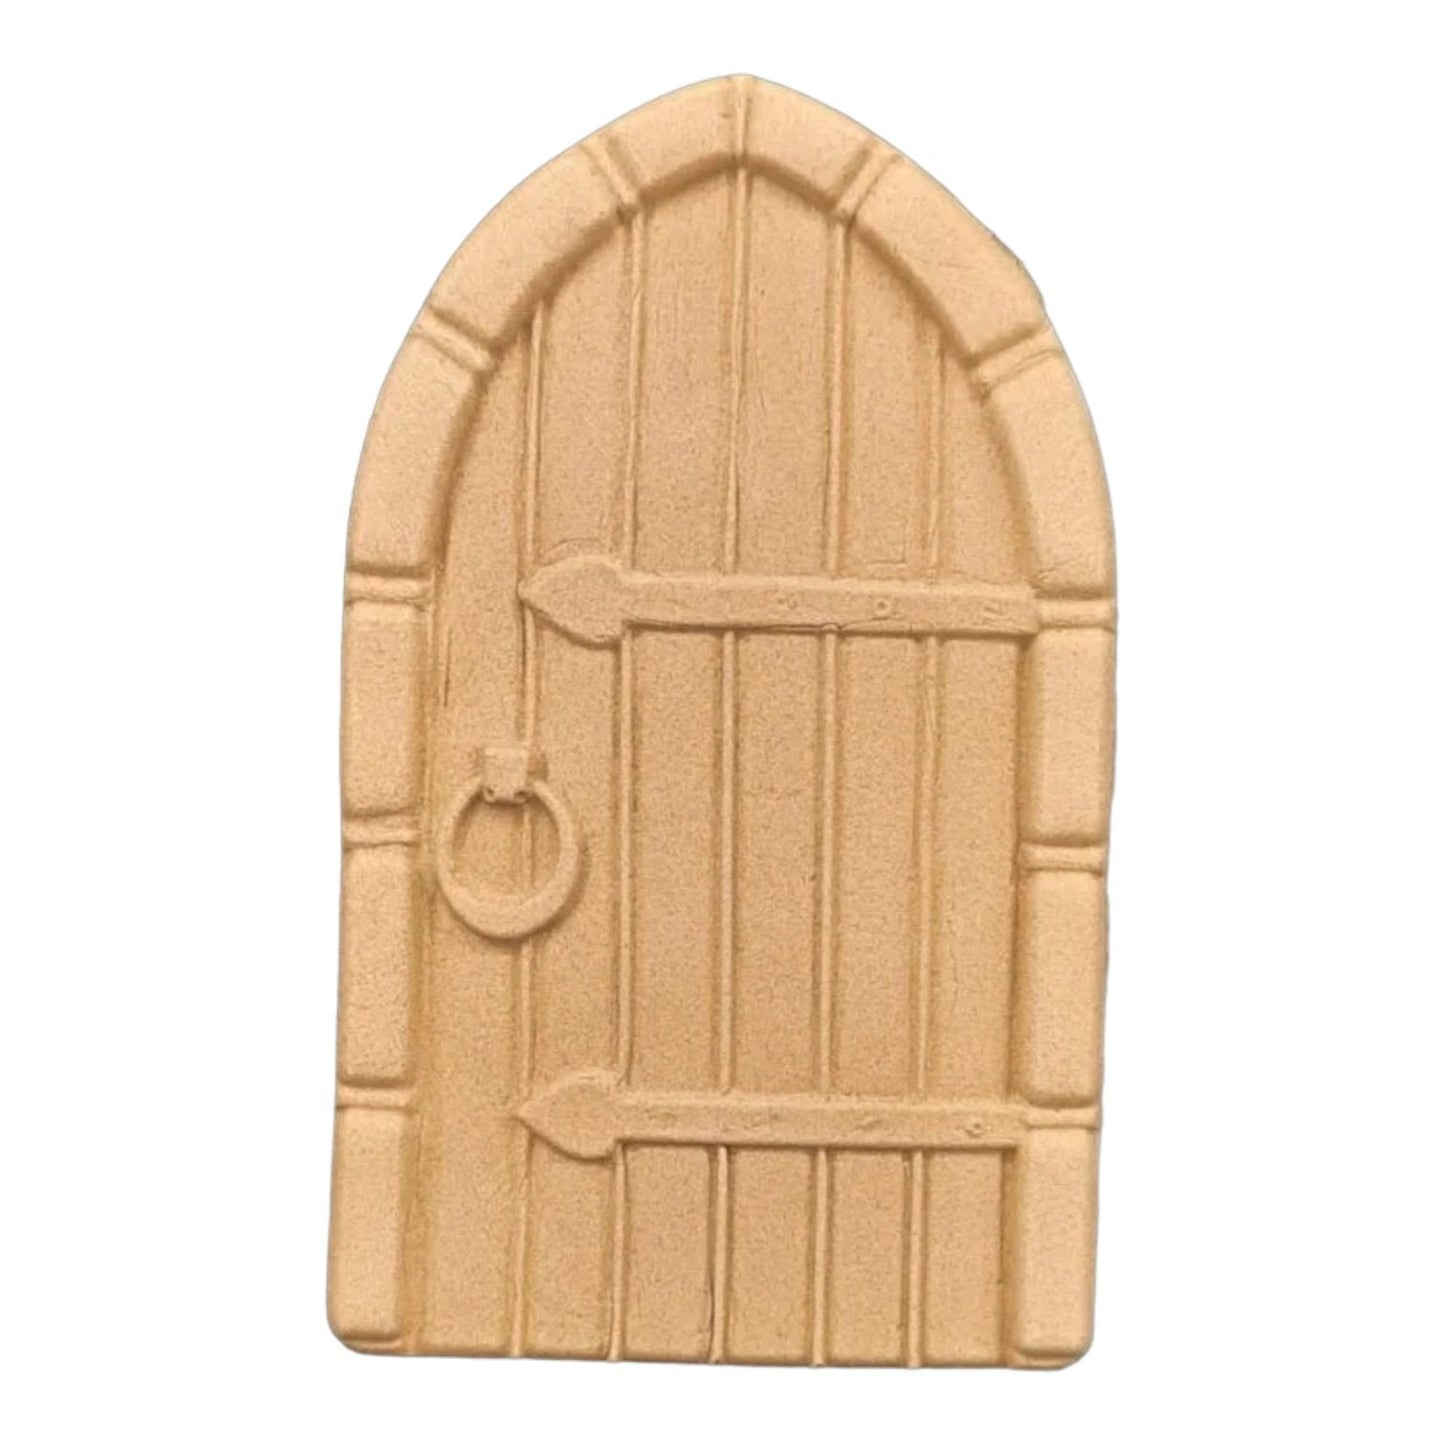 IFW 3602 Door embellishment, great for doll house